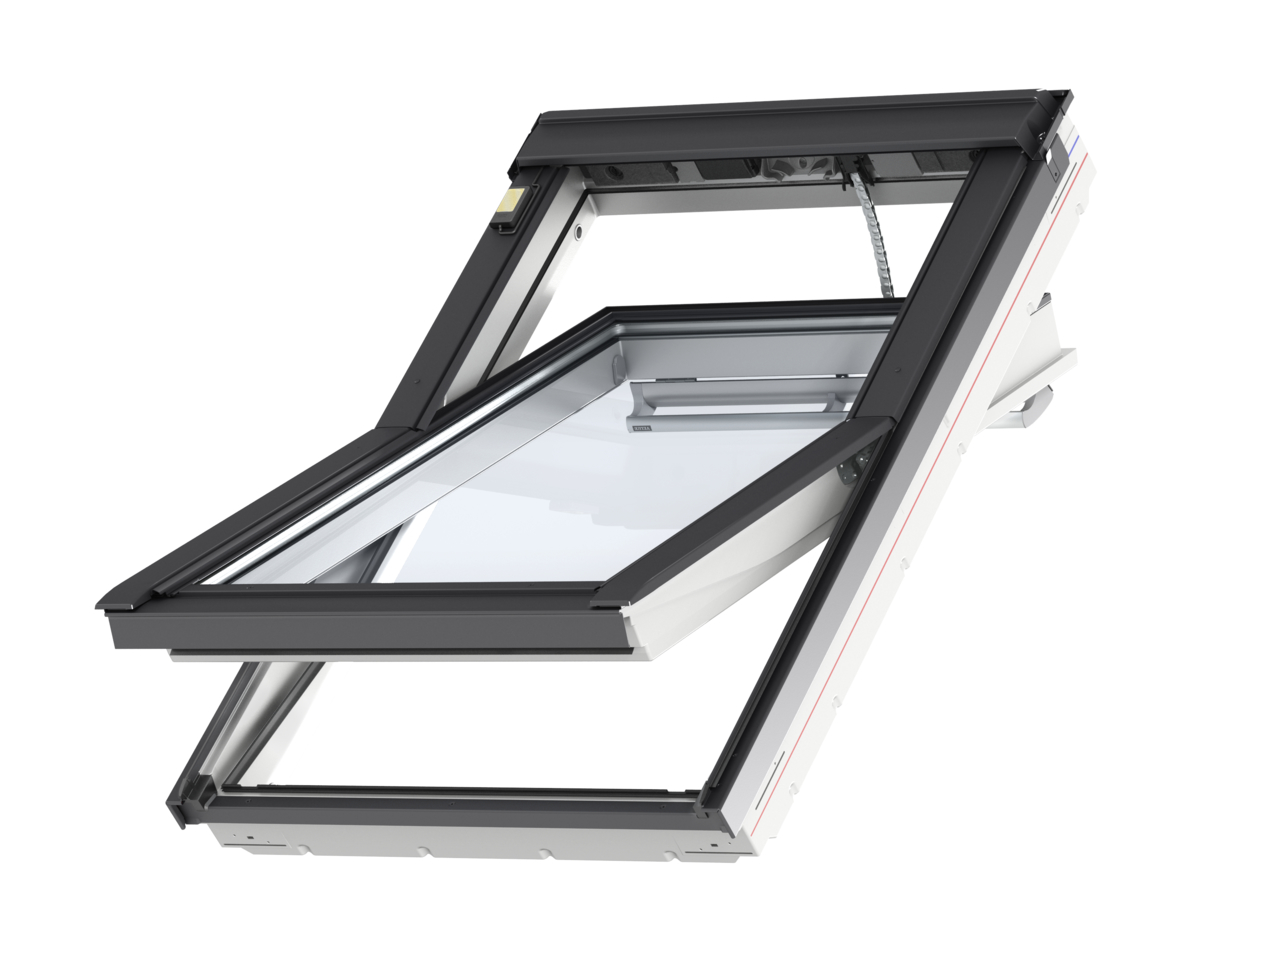 Velux GGU Integra High Thermal Triple Glazed PVC Coated Centre Pivot Pitched Roof Window